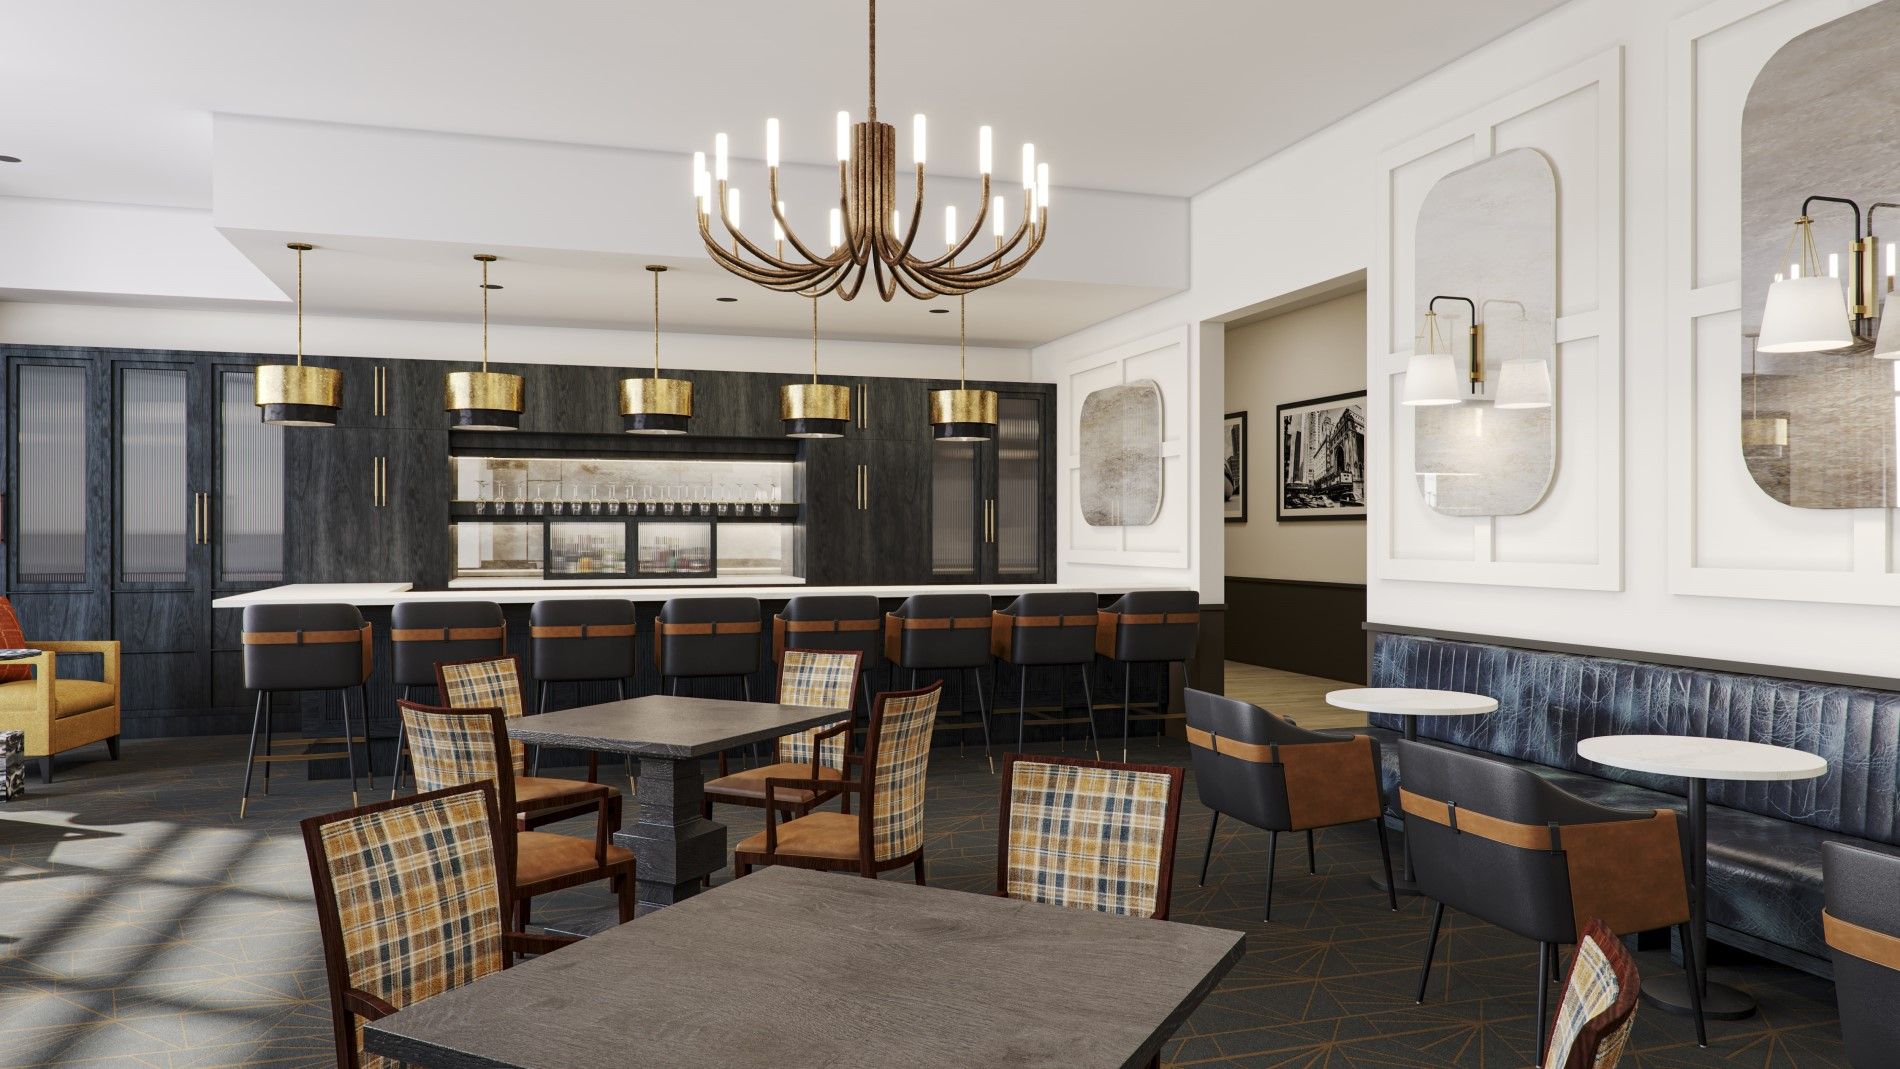 Interior view of Oak Park senior living community featuring dining room with elegant furniture and design.